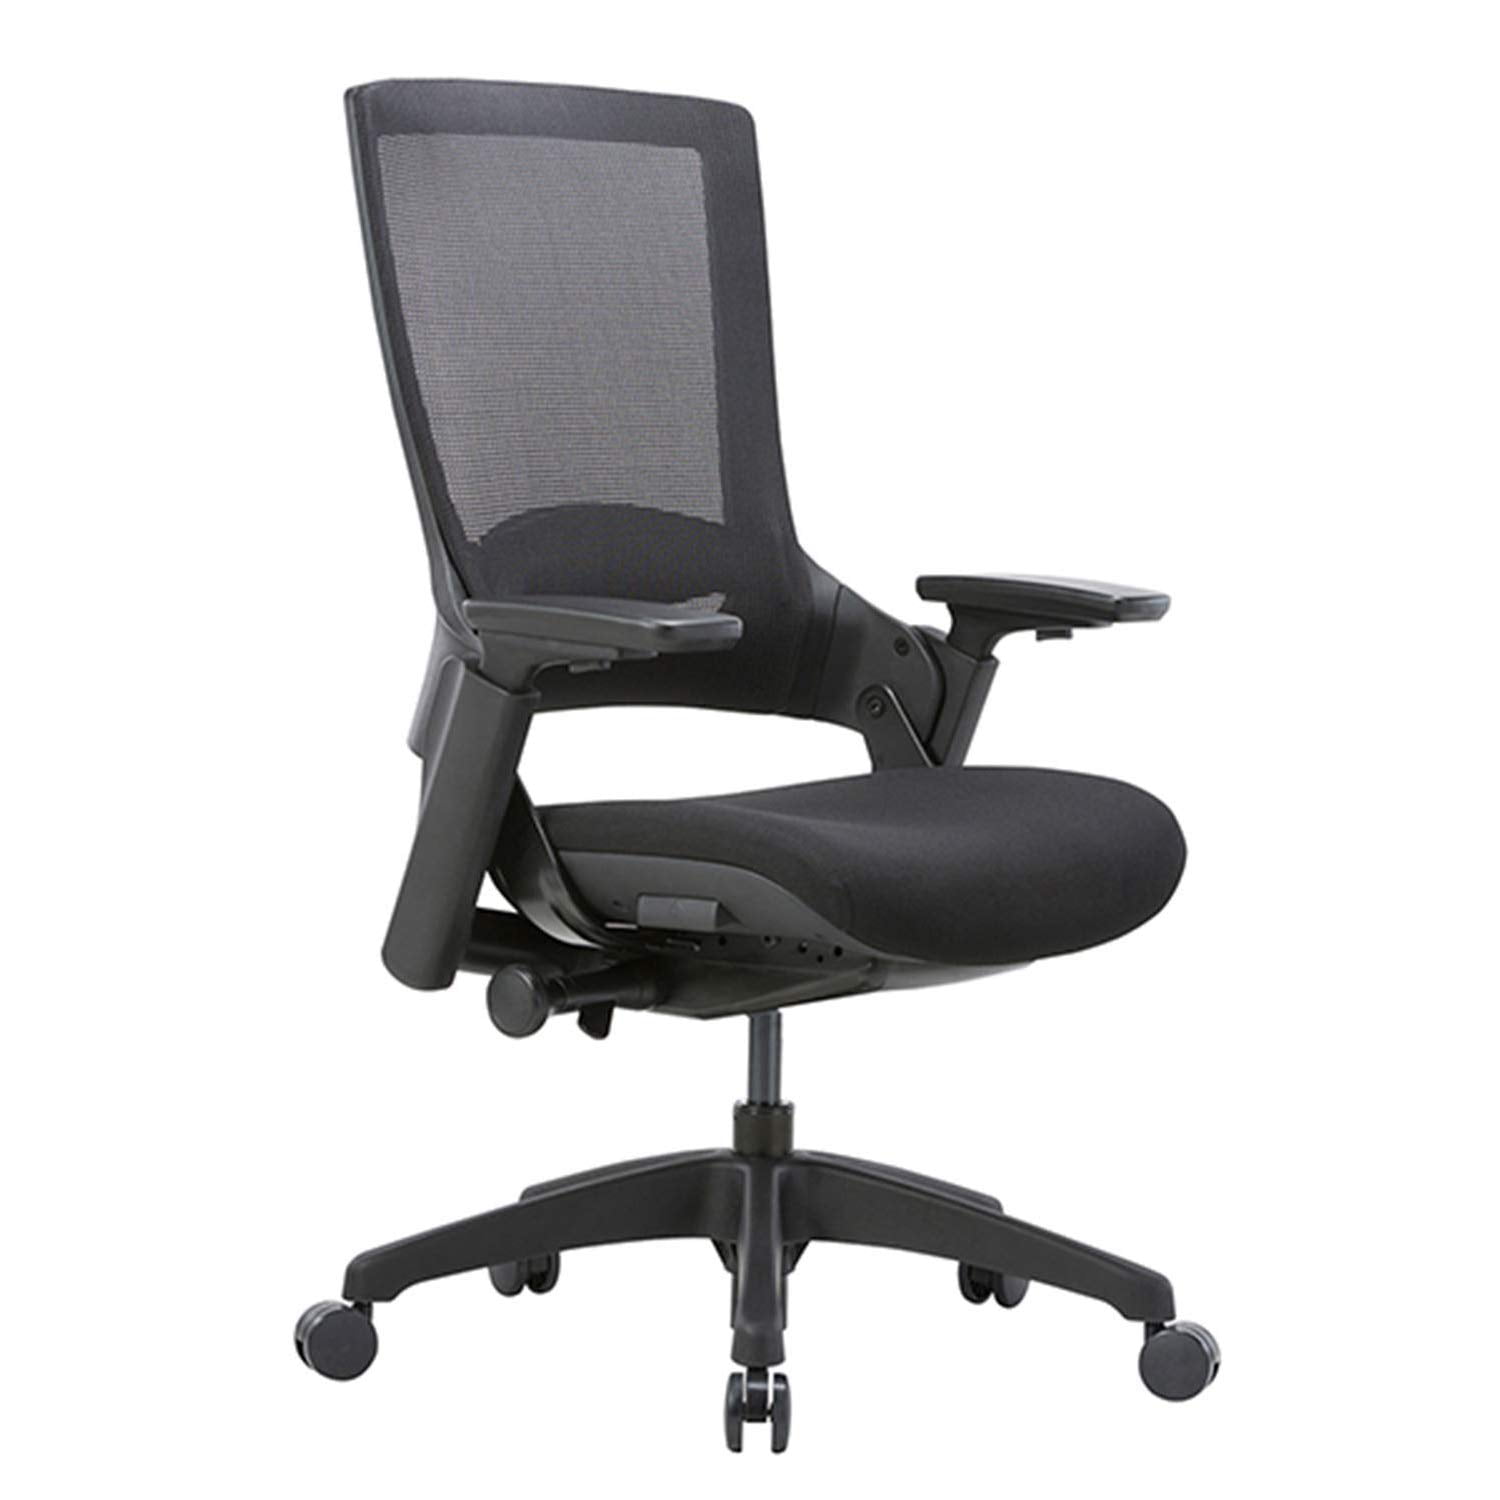 CLATINA Ergonomic High Swivel Executive Chair with Adjustable Height 3D Arm Rest Lumbar Support and Mesh Back for Home Office BIFMA Certified Black